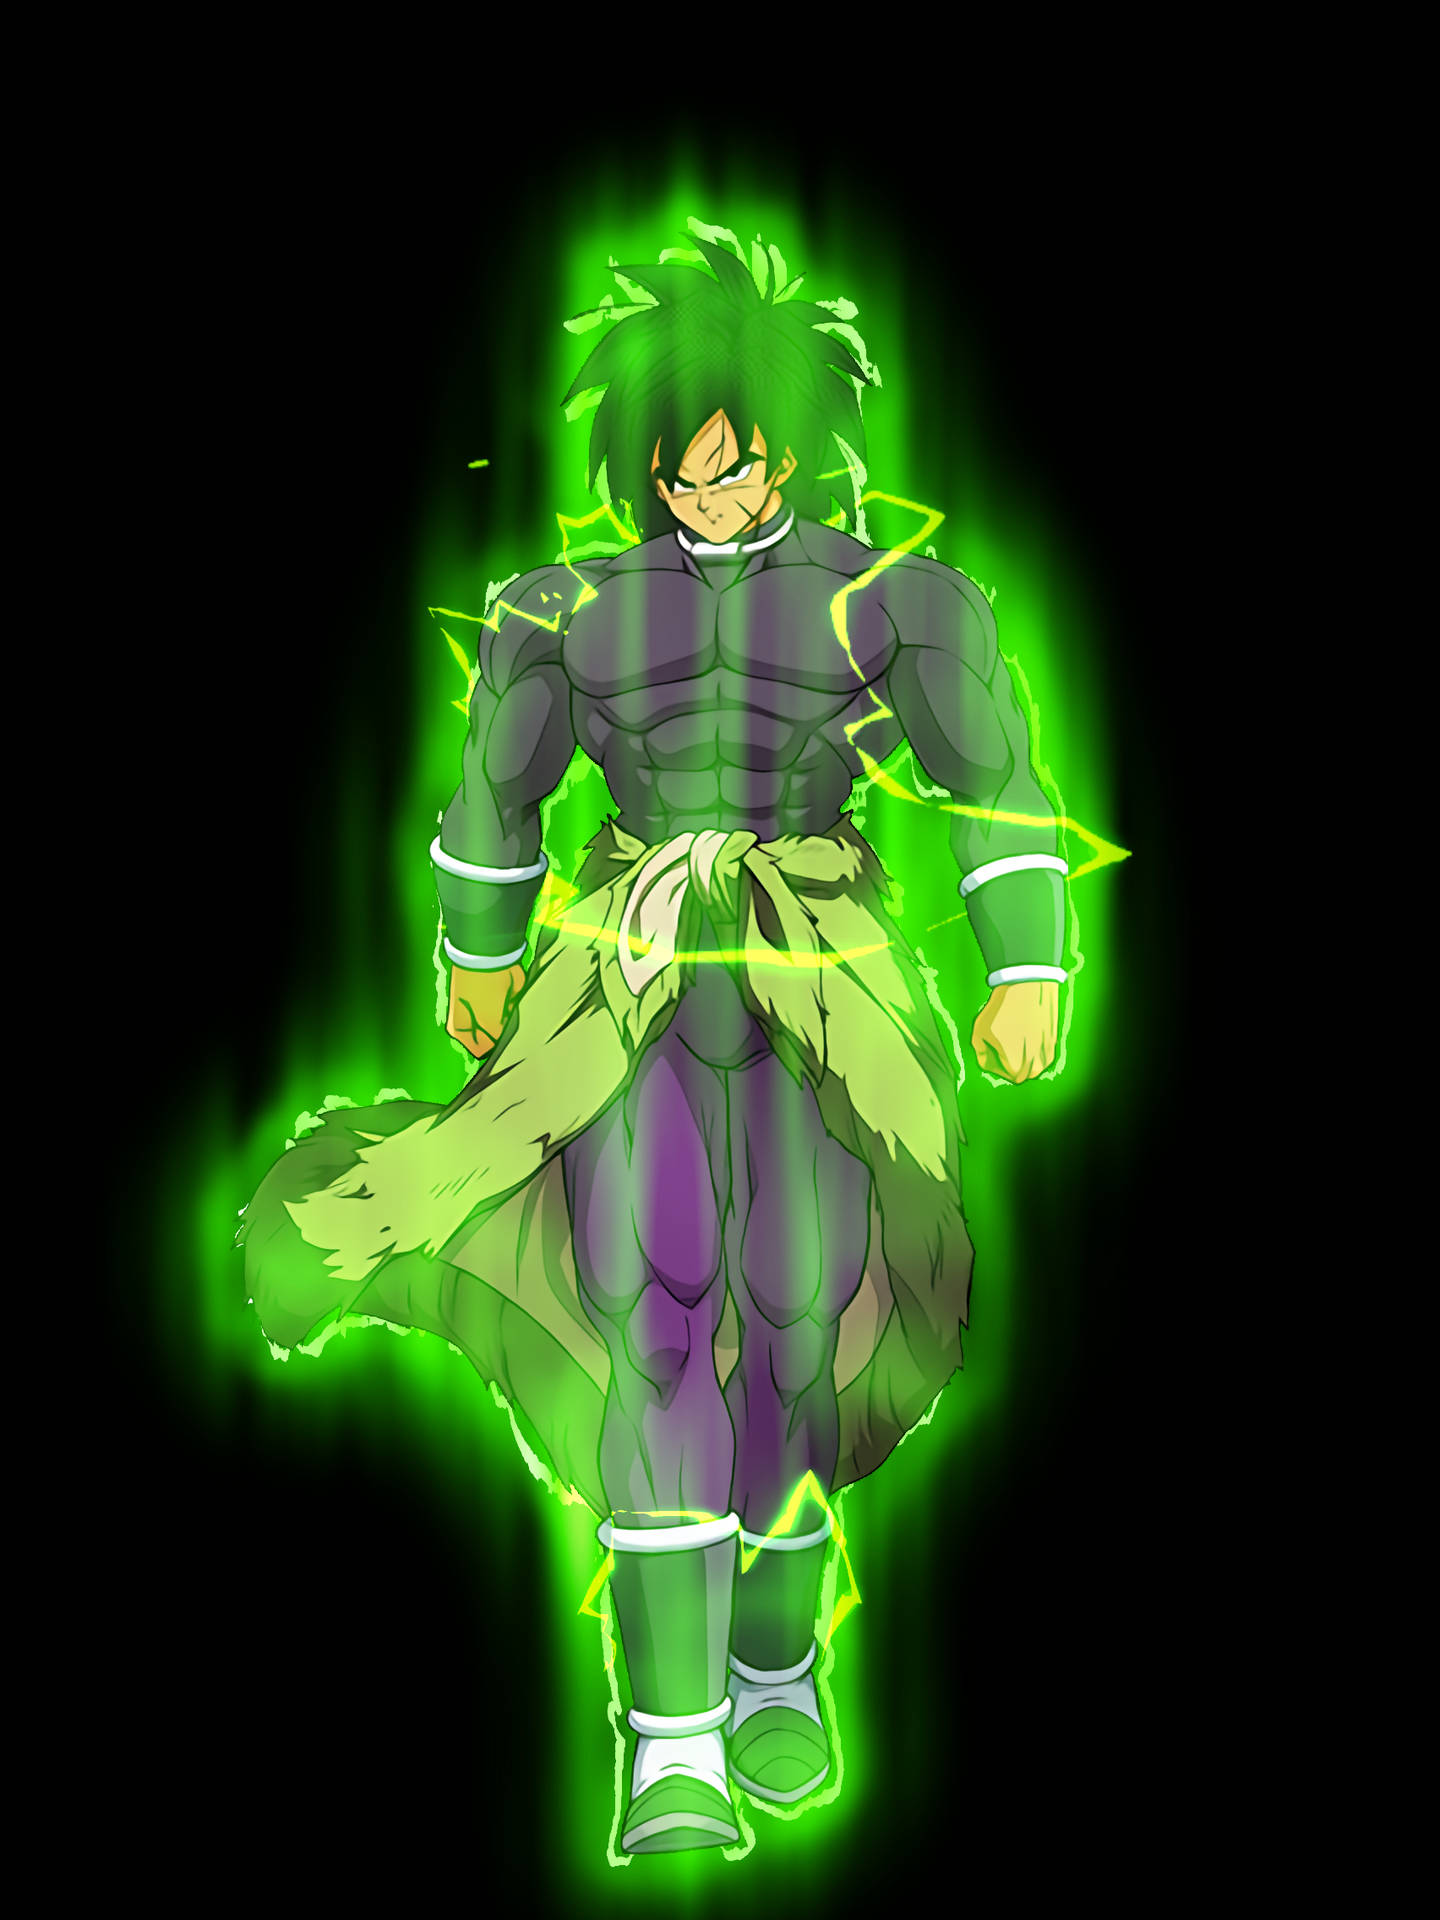 Download Base Broly With Green Aura Wallpaper